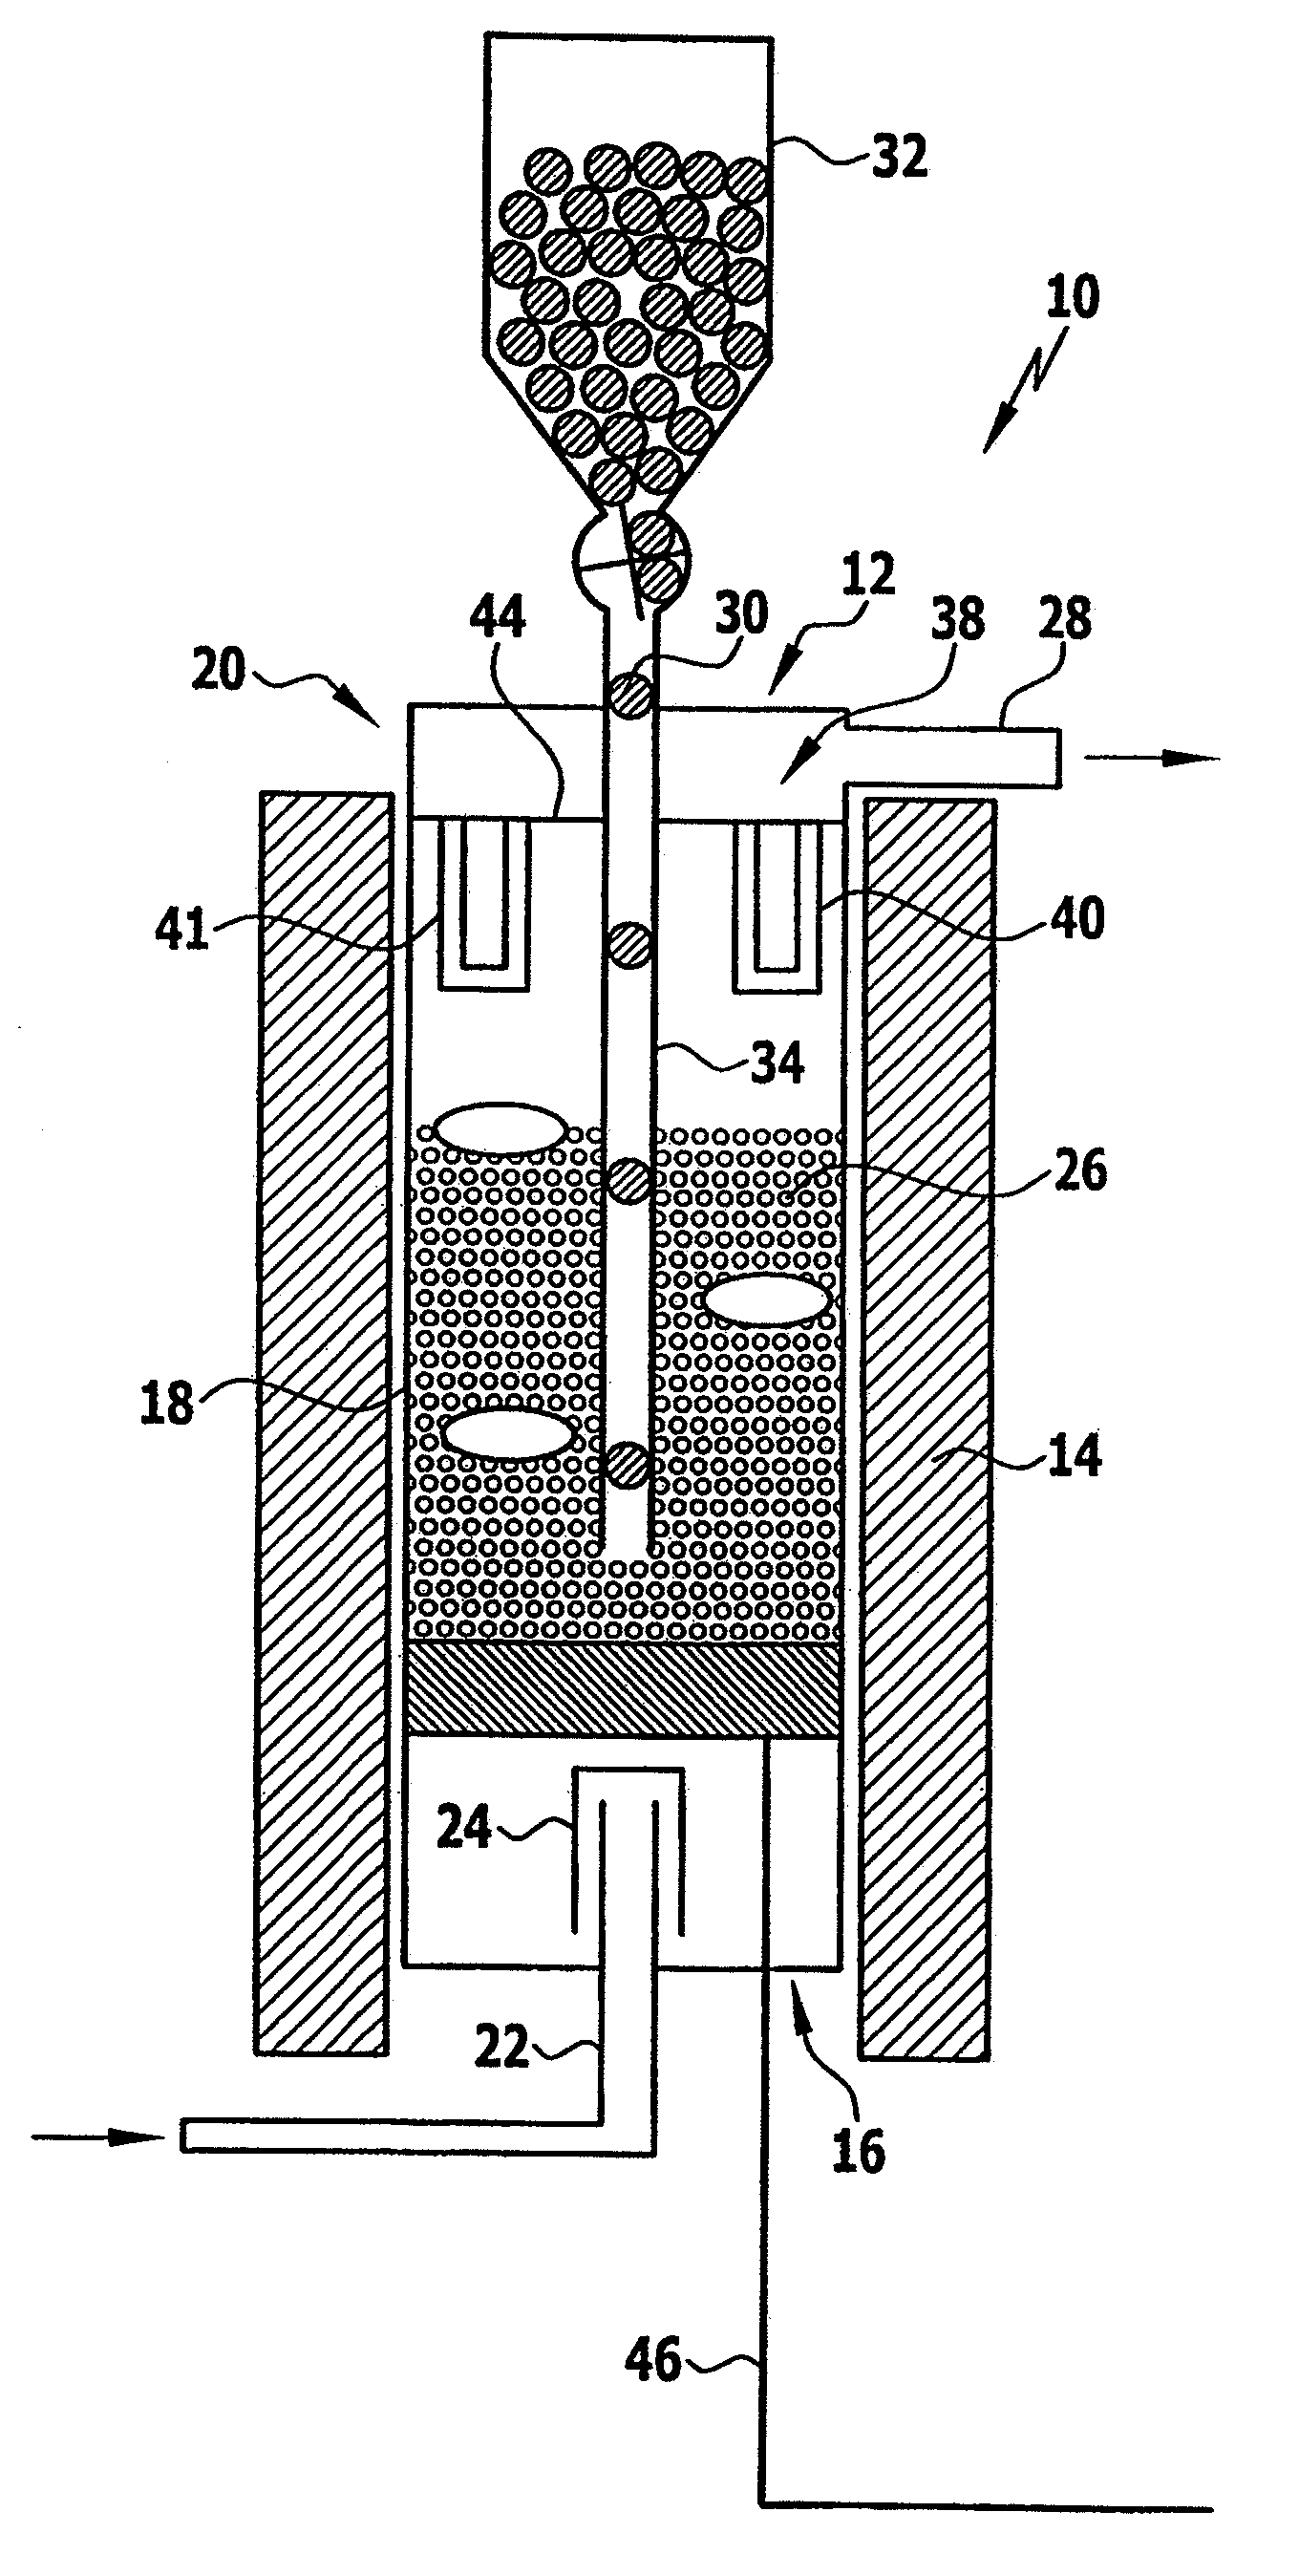 Gasification apparatus and method for generating syngas from gasifiable feedstock material